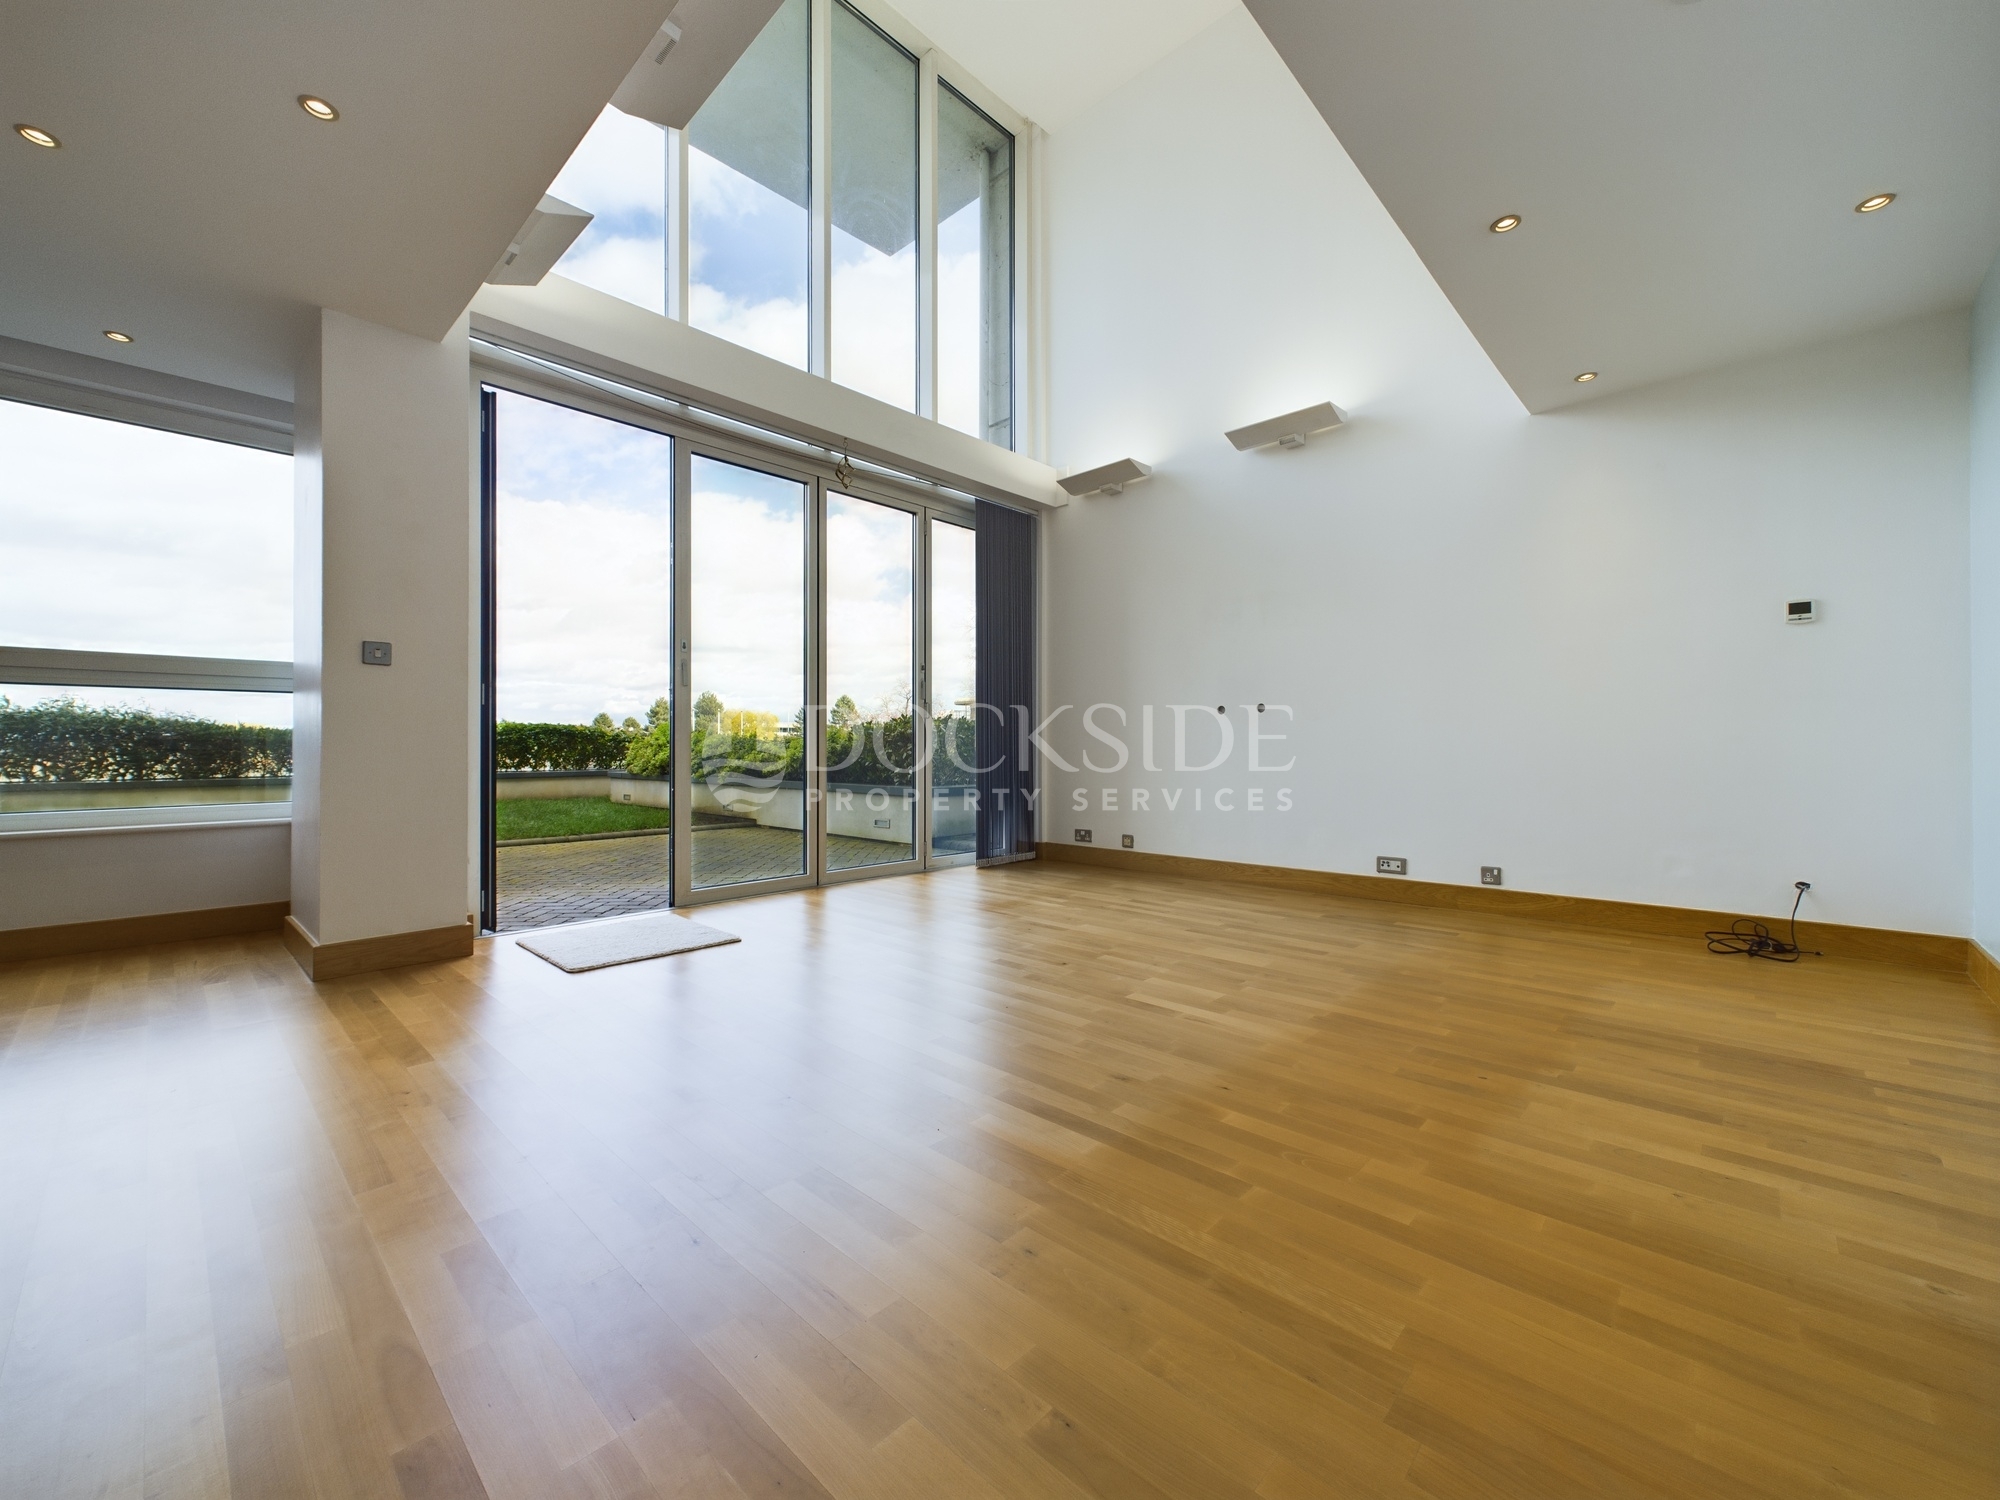 5 bed to rent in Pier Road, Gillingham  - Property Image 1